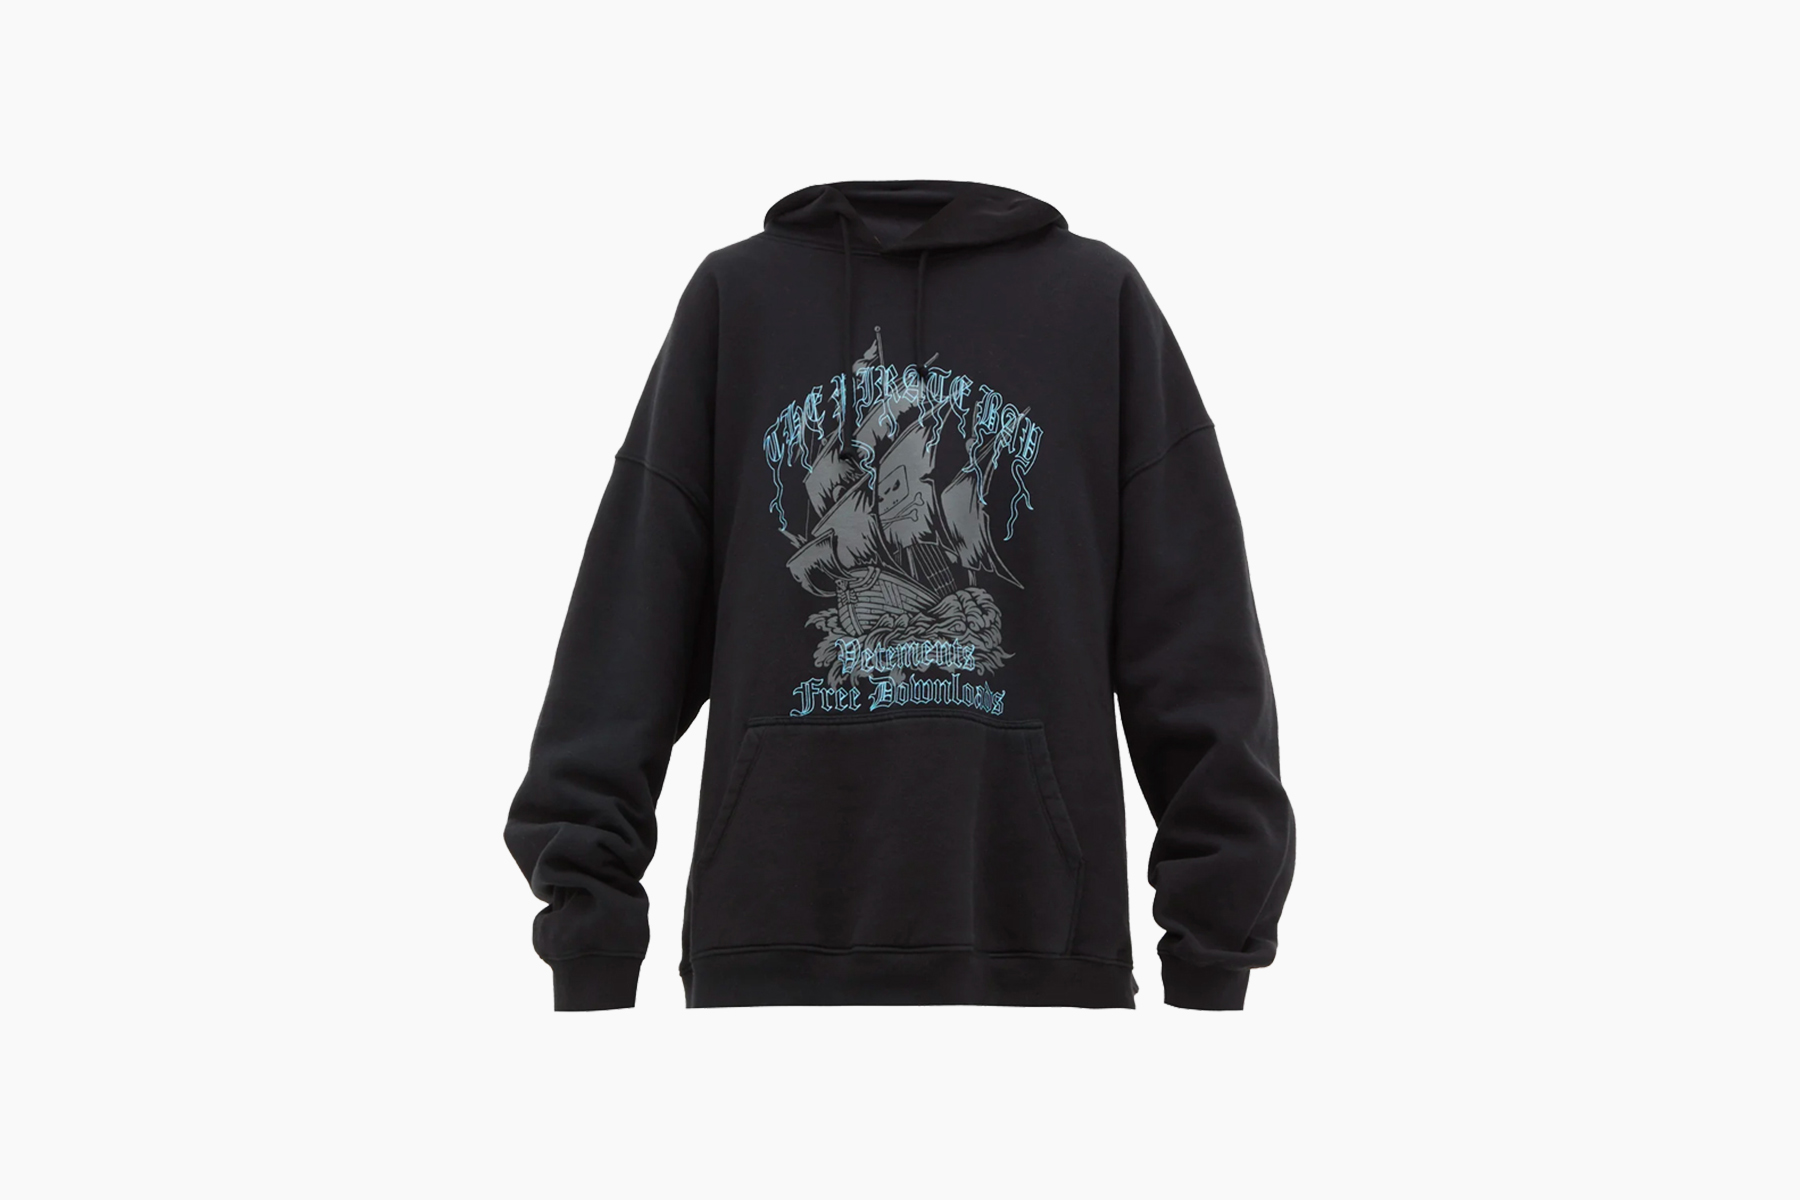 Vetements The Pirate Bay Hoodie Release 